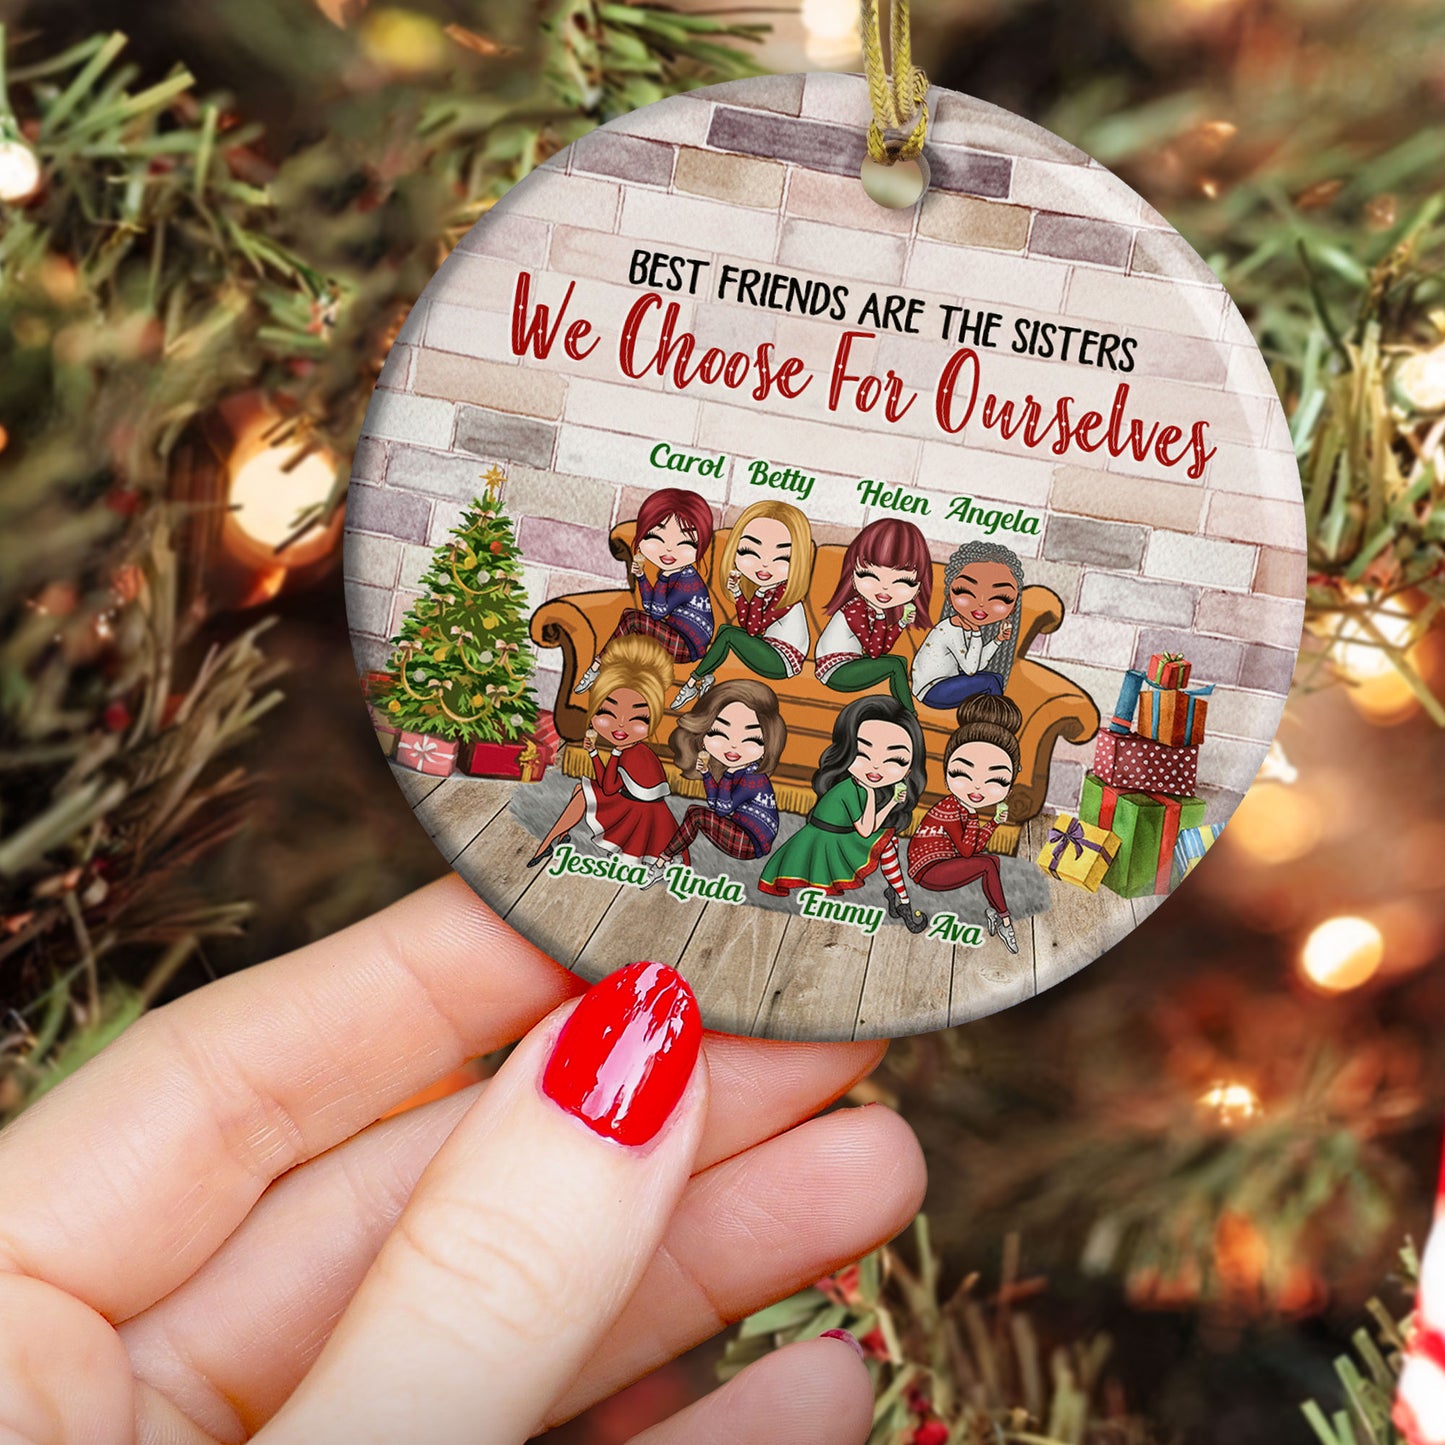 Best Friends Are The Sisters - Personalized Ceramic Ornament - Christmas Gift For Friends